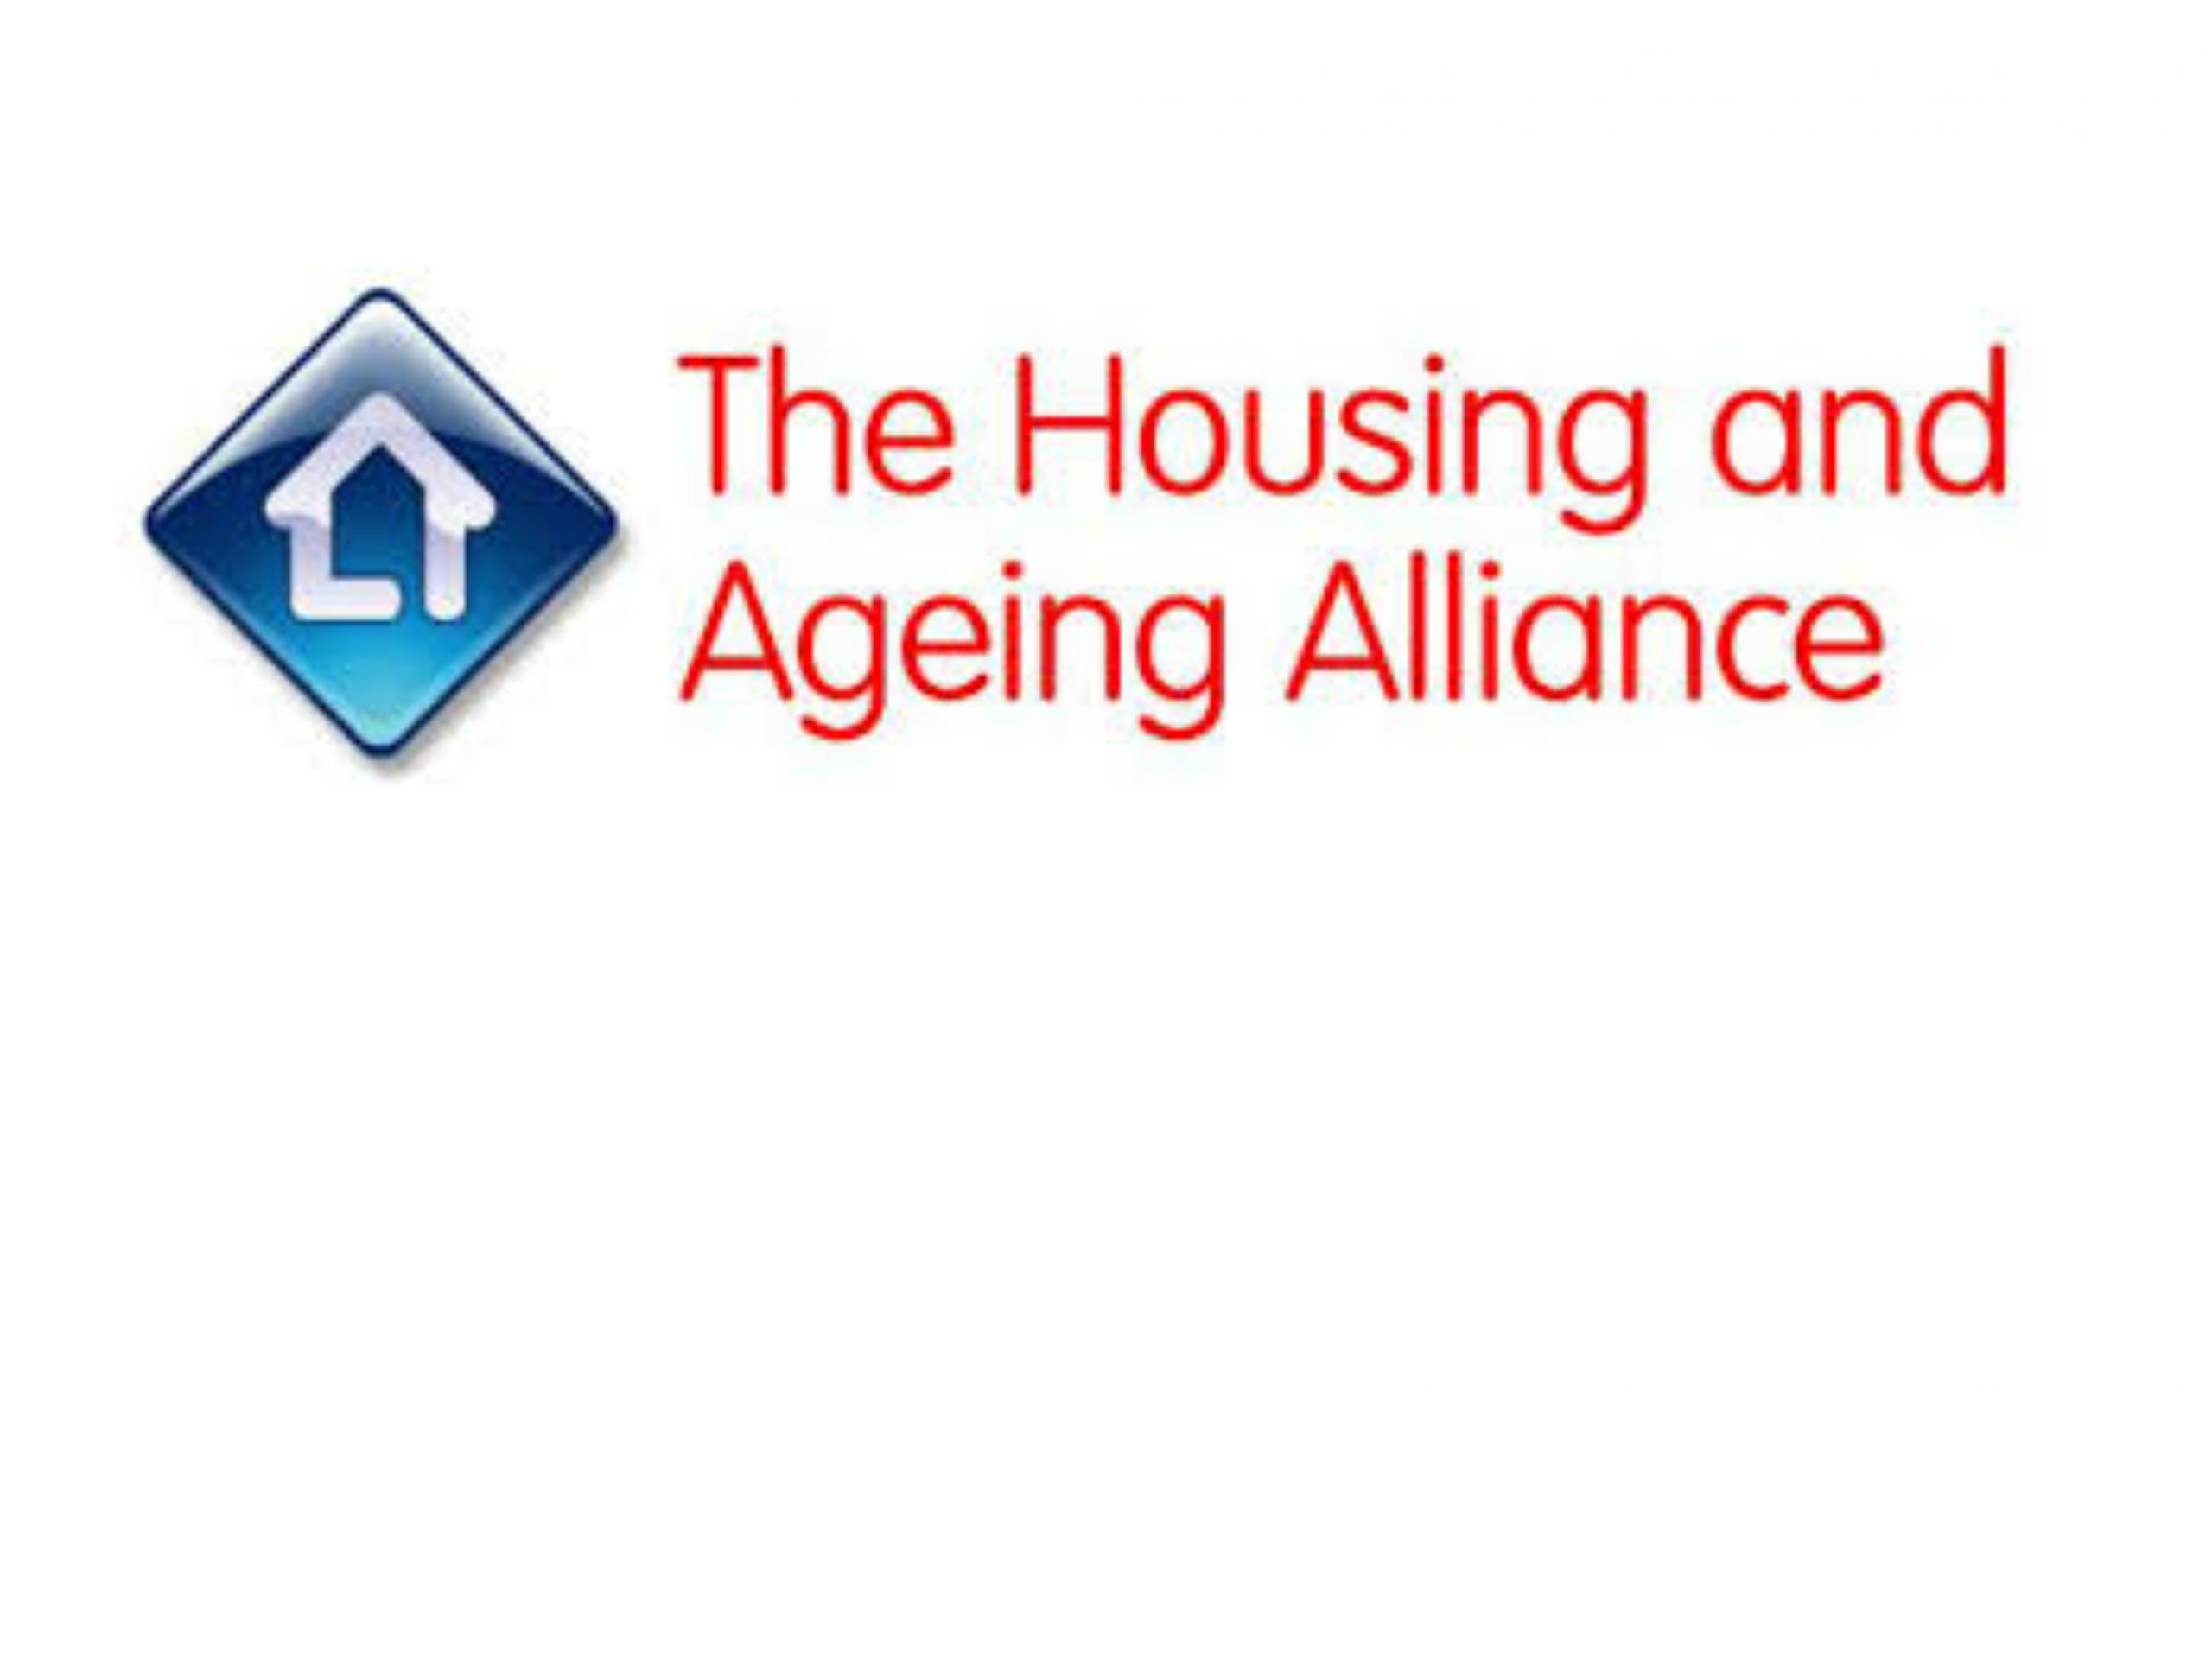 Housing and Ageing Alliance 2019 Manifesto